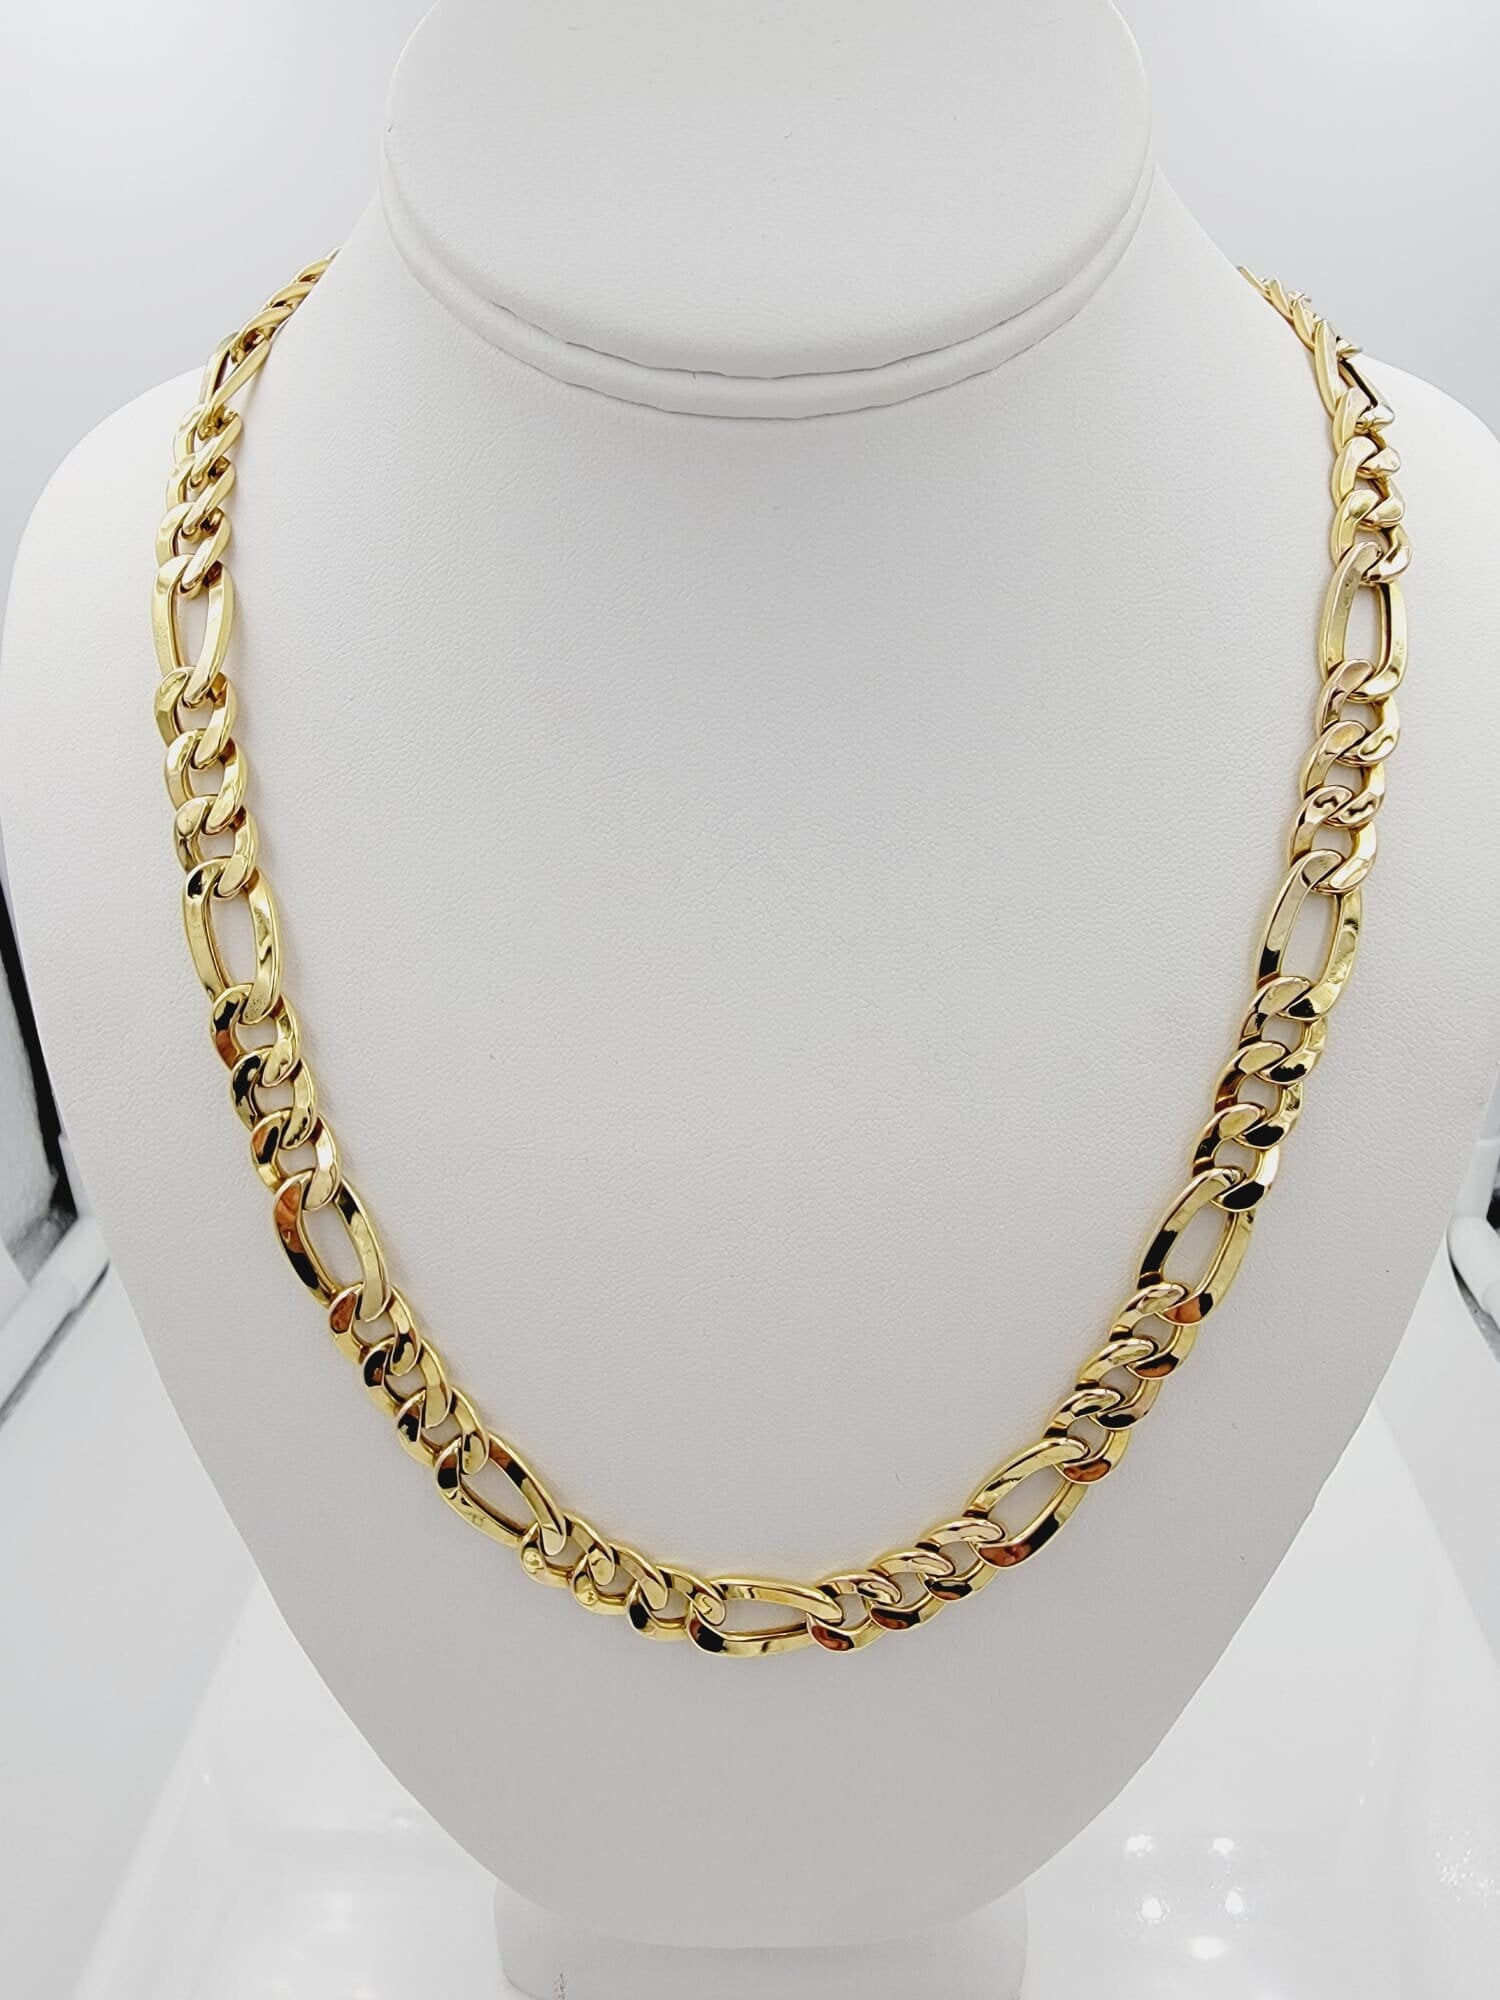 10k Yellow Gold Figaro Link Chain - 22 Inches, 10.4 mm, 26.3 grams